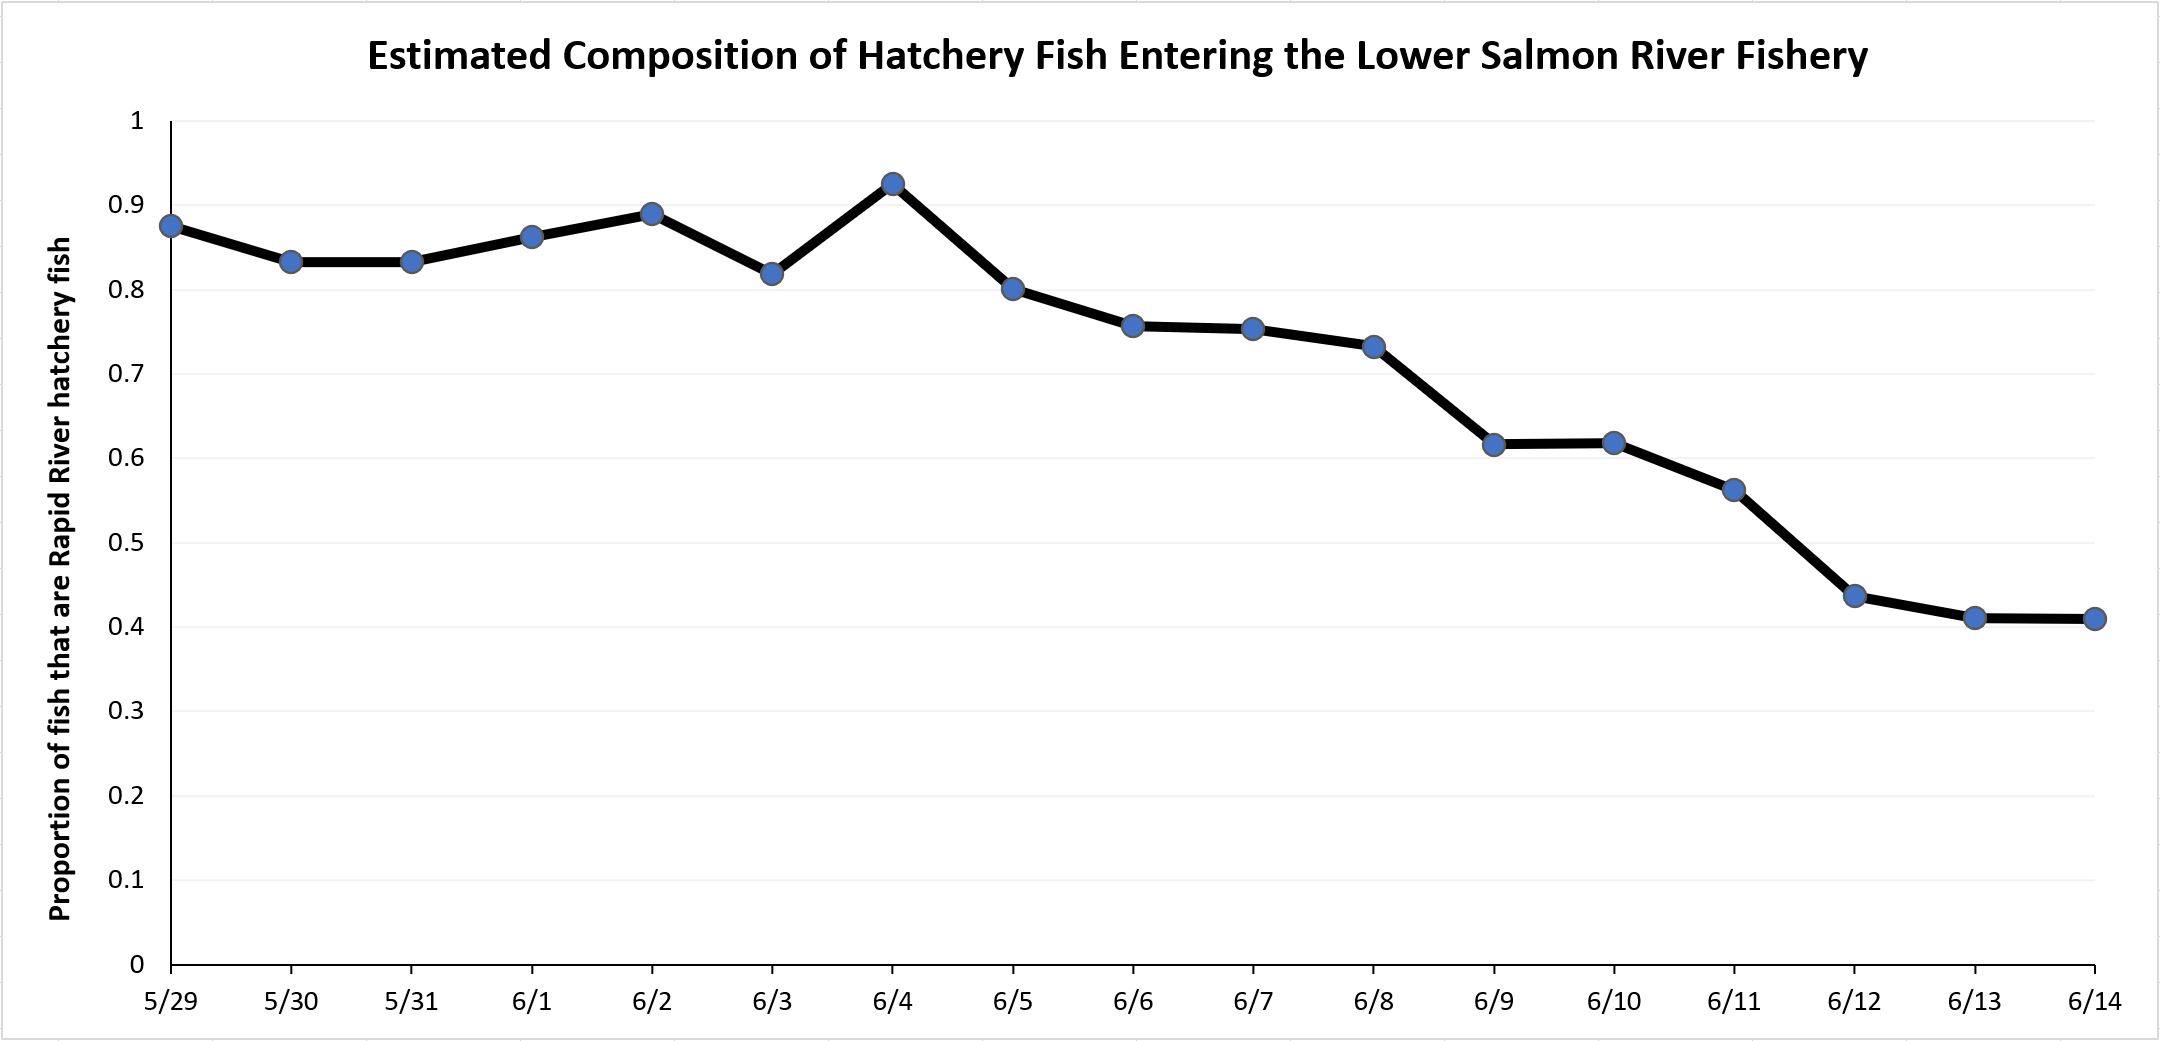 Understanding Idaho Fish and Game's decision to stock Boise River with  surplus Chinook salmon